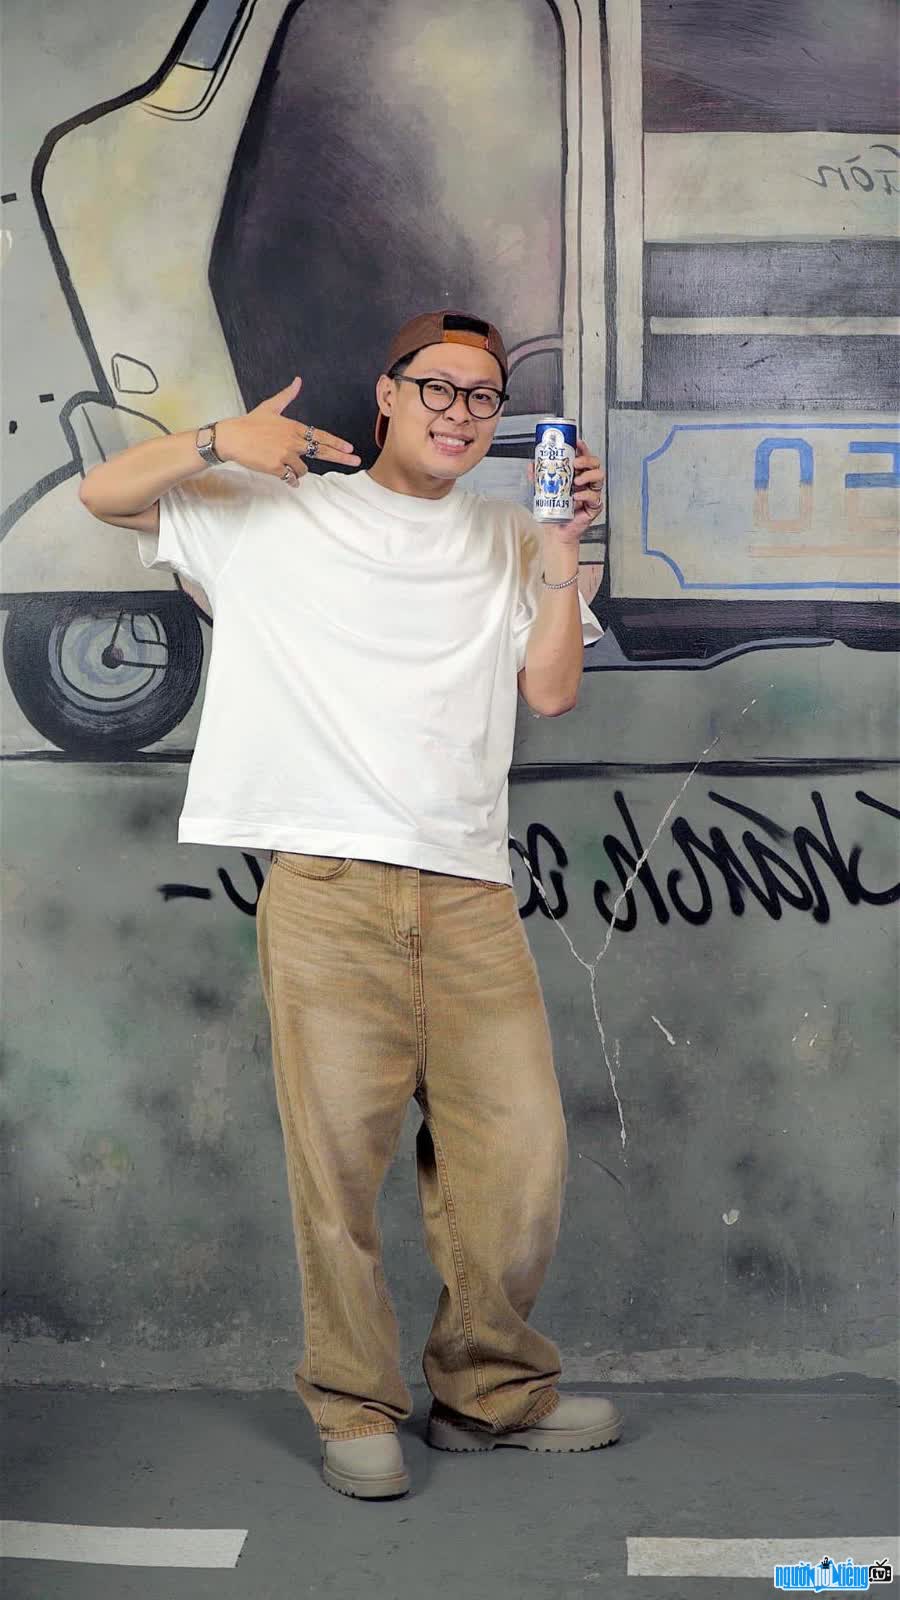 Image of rapper HurryKng smiling brightly